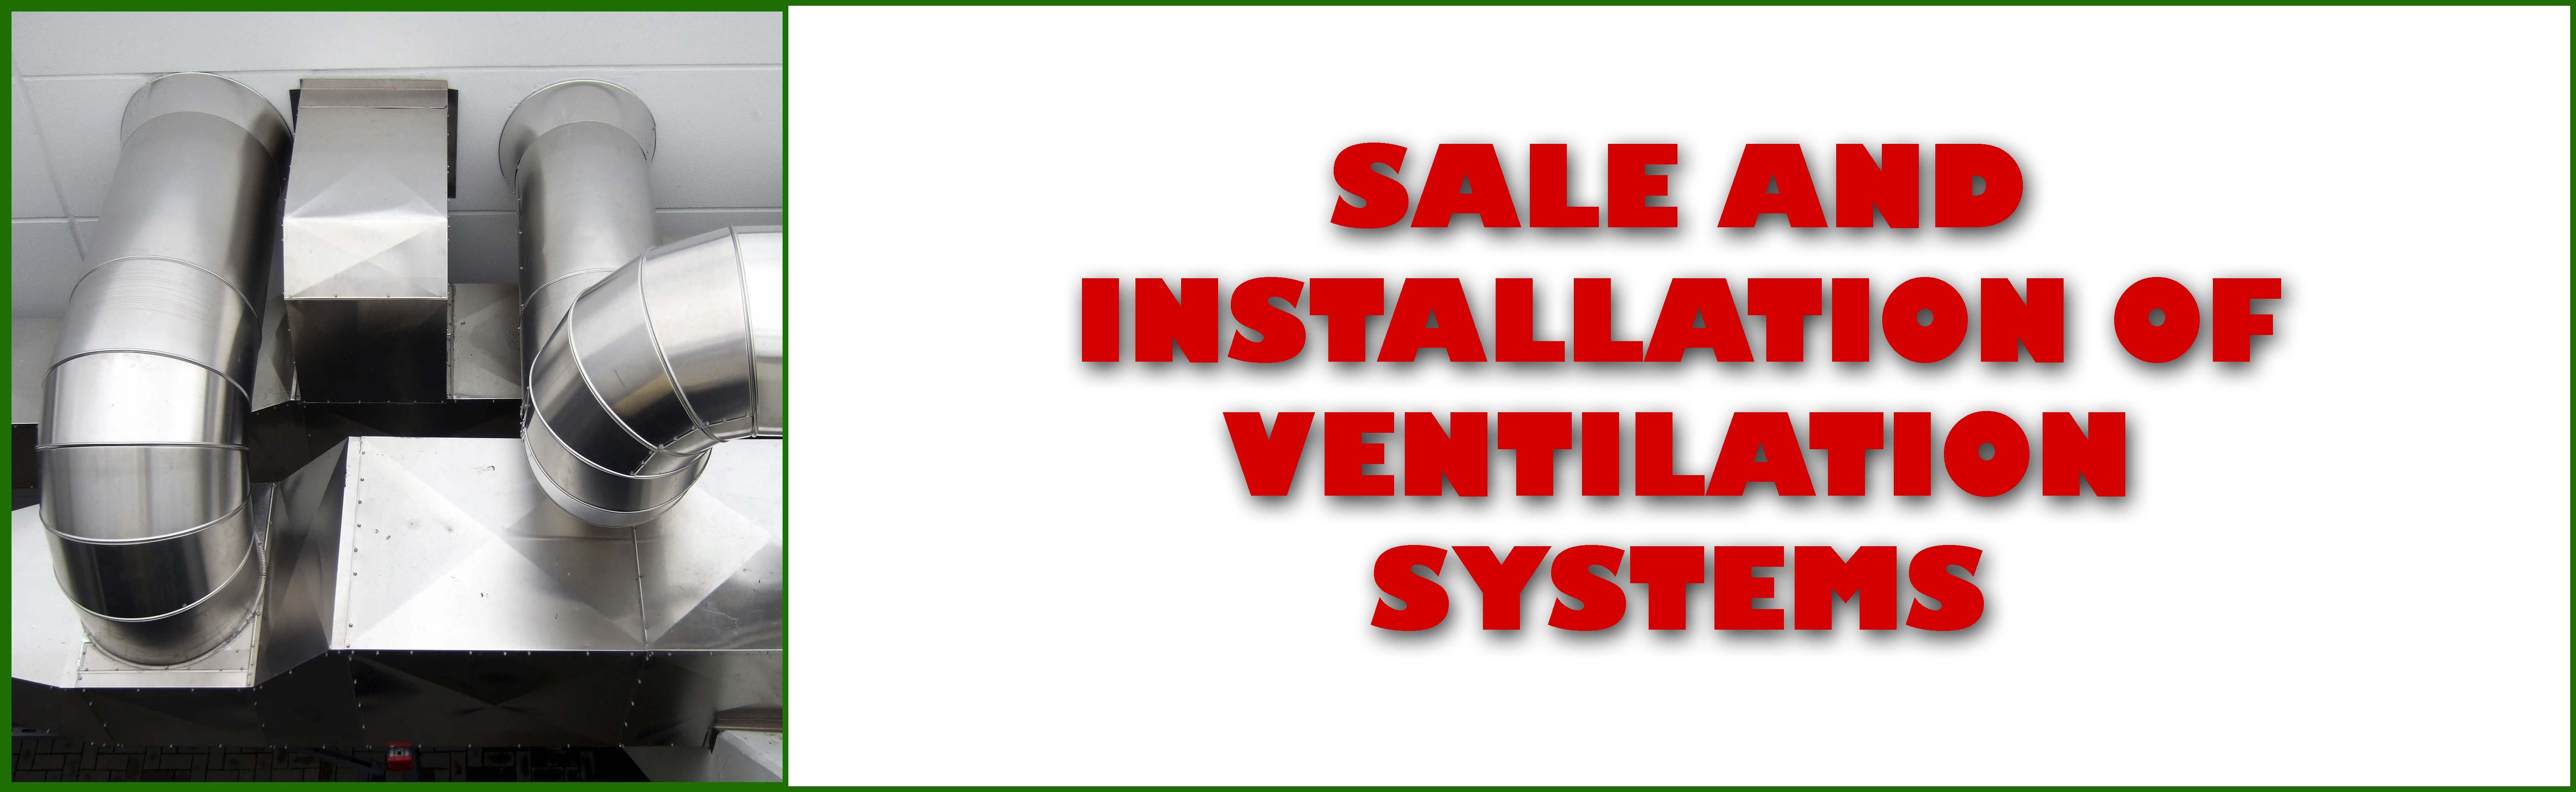 sale and install ventilation